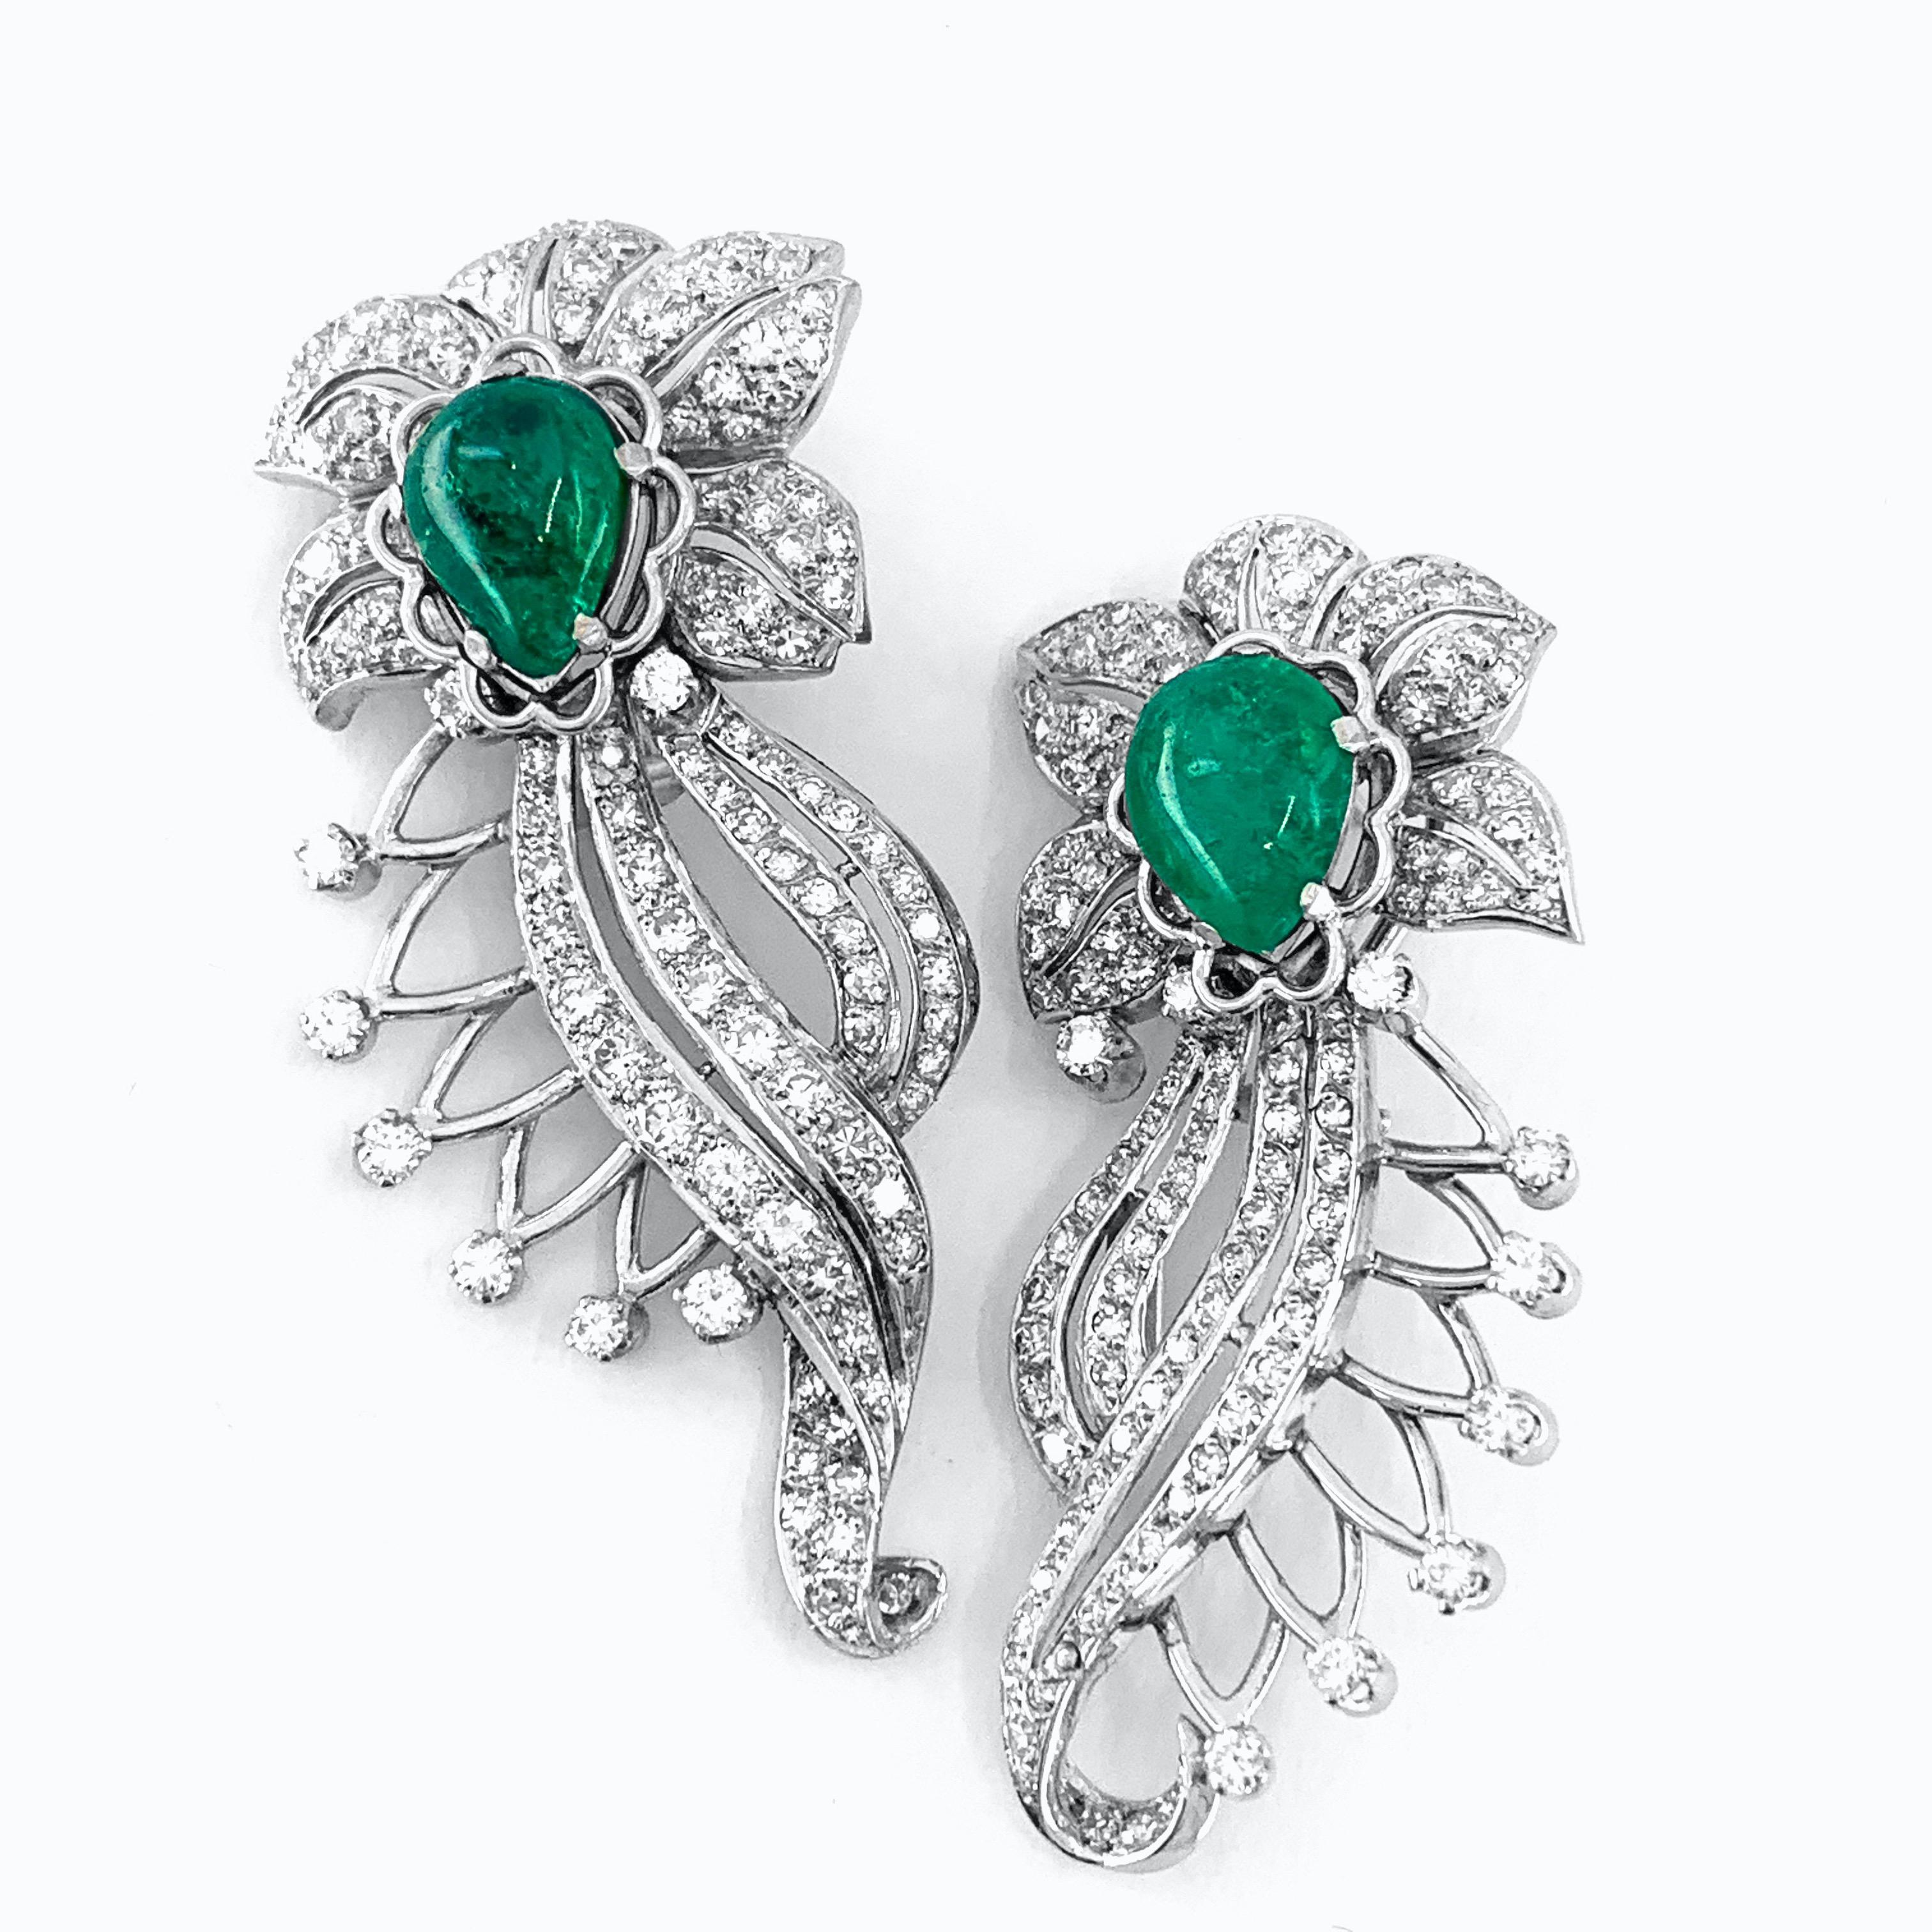 These magnificent earrings came to us as a magnificent fur clip, but Eytan decided they would get more wear on some lucky earlobes.

The workmanship is incredible. Every stone -- all 219 of them -- is neatly backholed.  Every petal and every ribbon